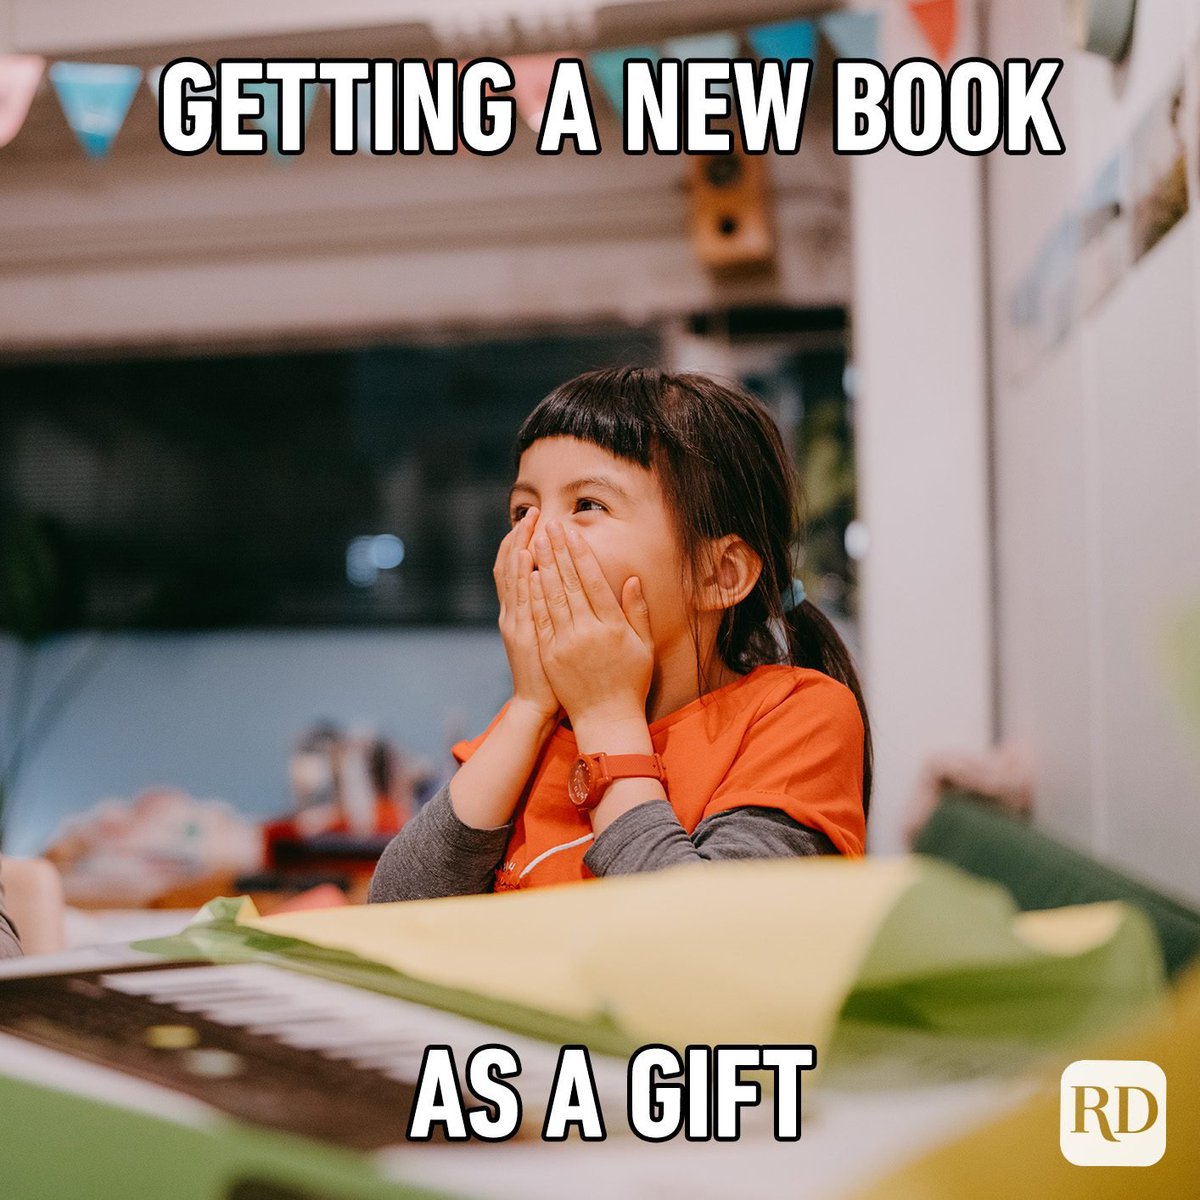 Even when I buy it for myself, a book is a gift. #books #ReadingCommunity #buyingbooks